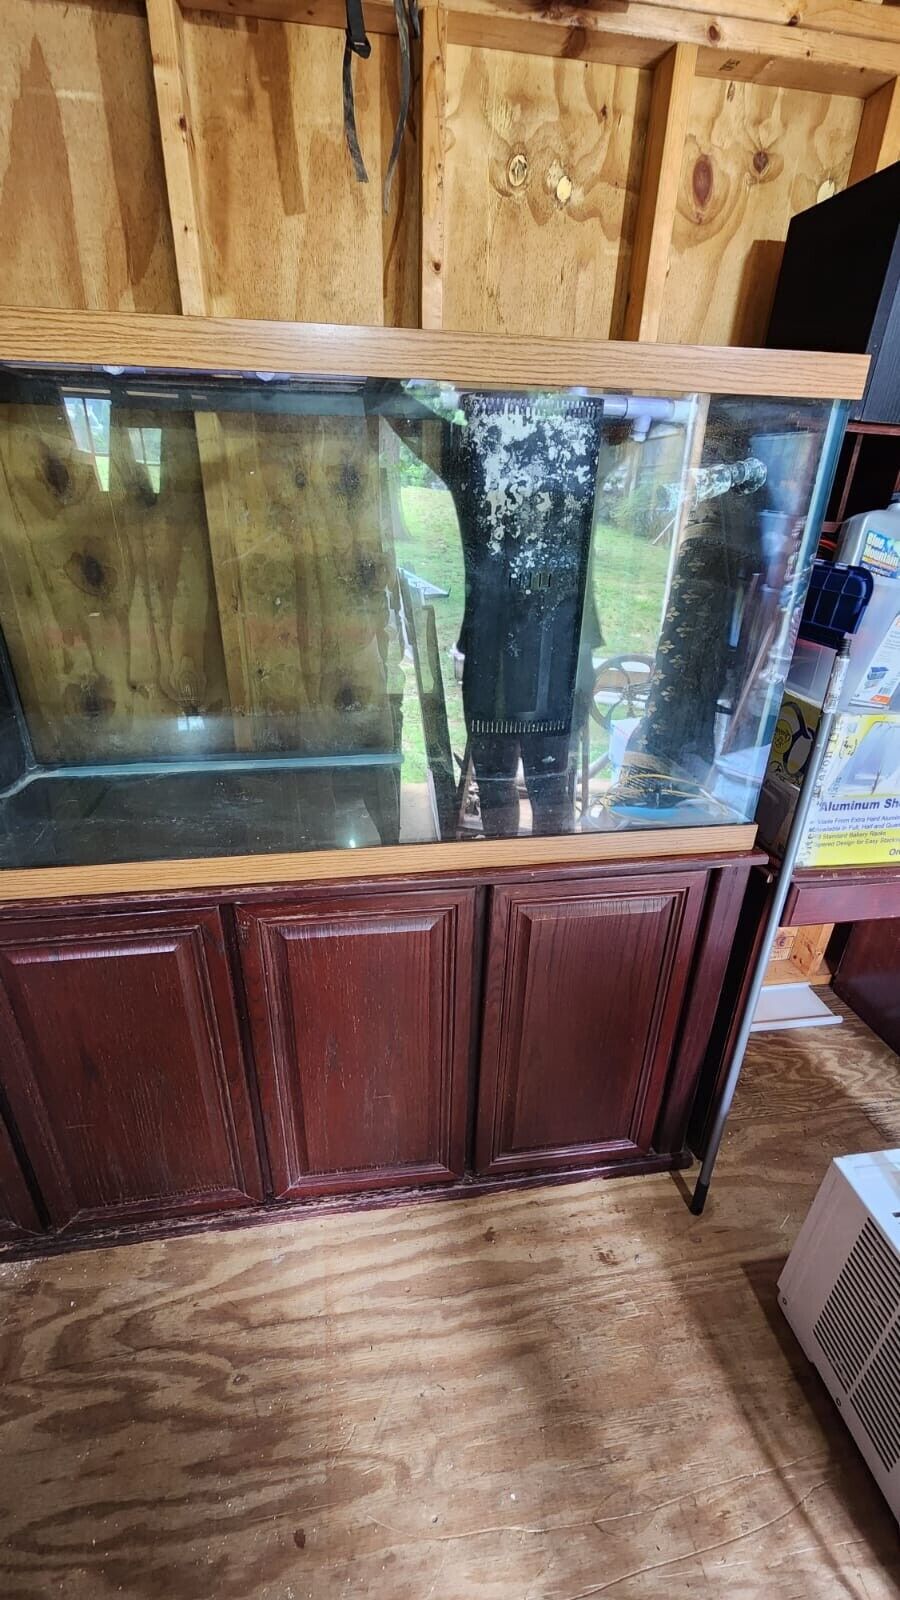 150 Gallon Reef Ready Aquarium (50lbs Dry Live Rock and Substrate Included)